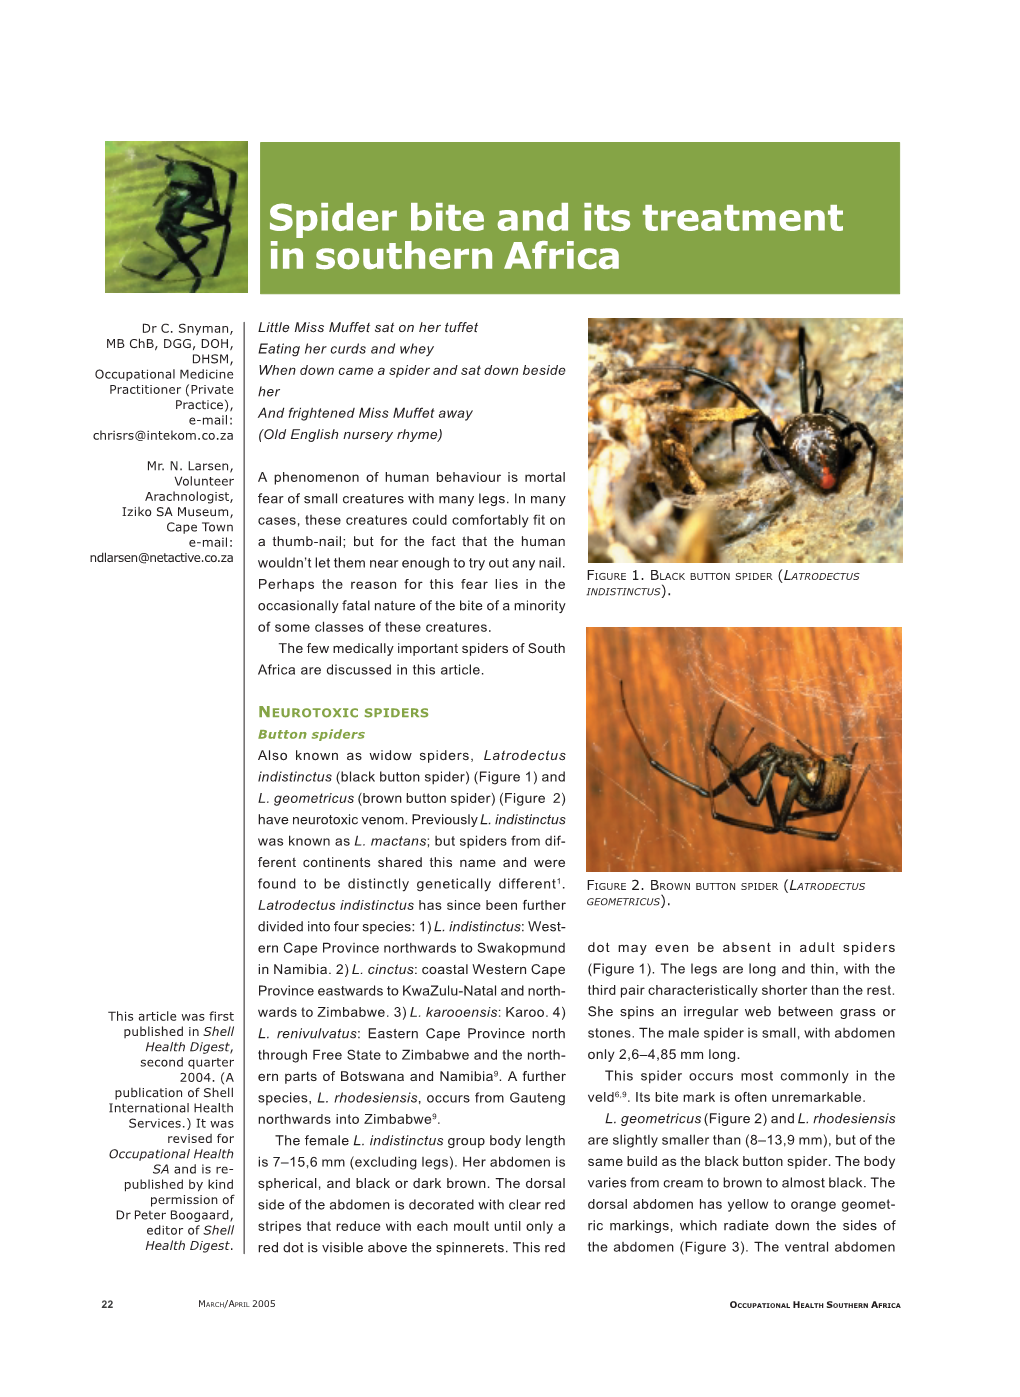 Spider Bite and Its Treatment in Southern Africa